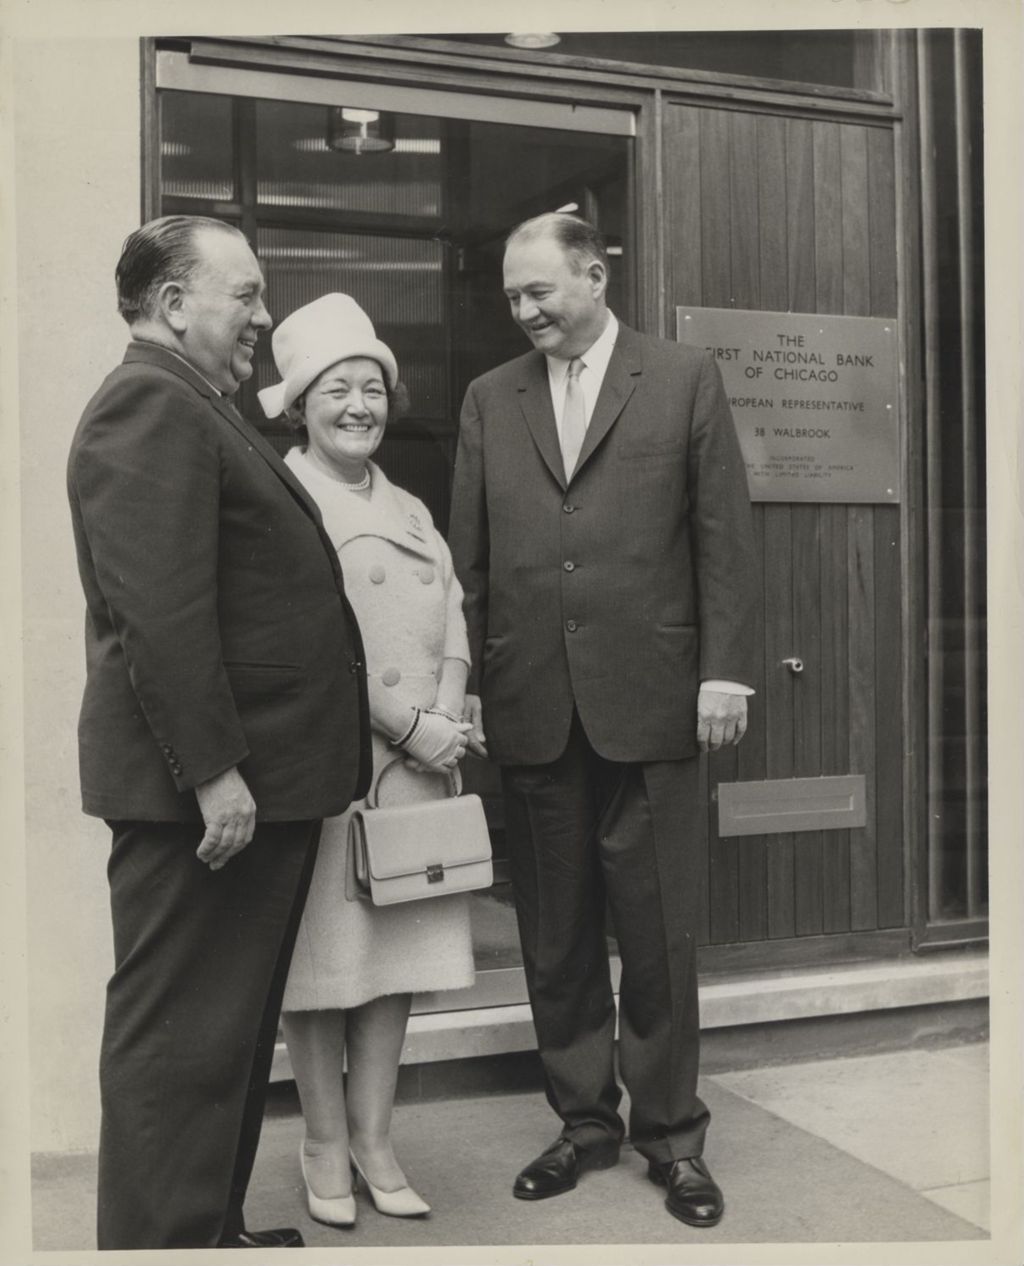 Miniature of Eleanor and Richard J. Daley with a representative of the First National Bank of Chicago in London